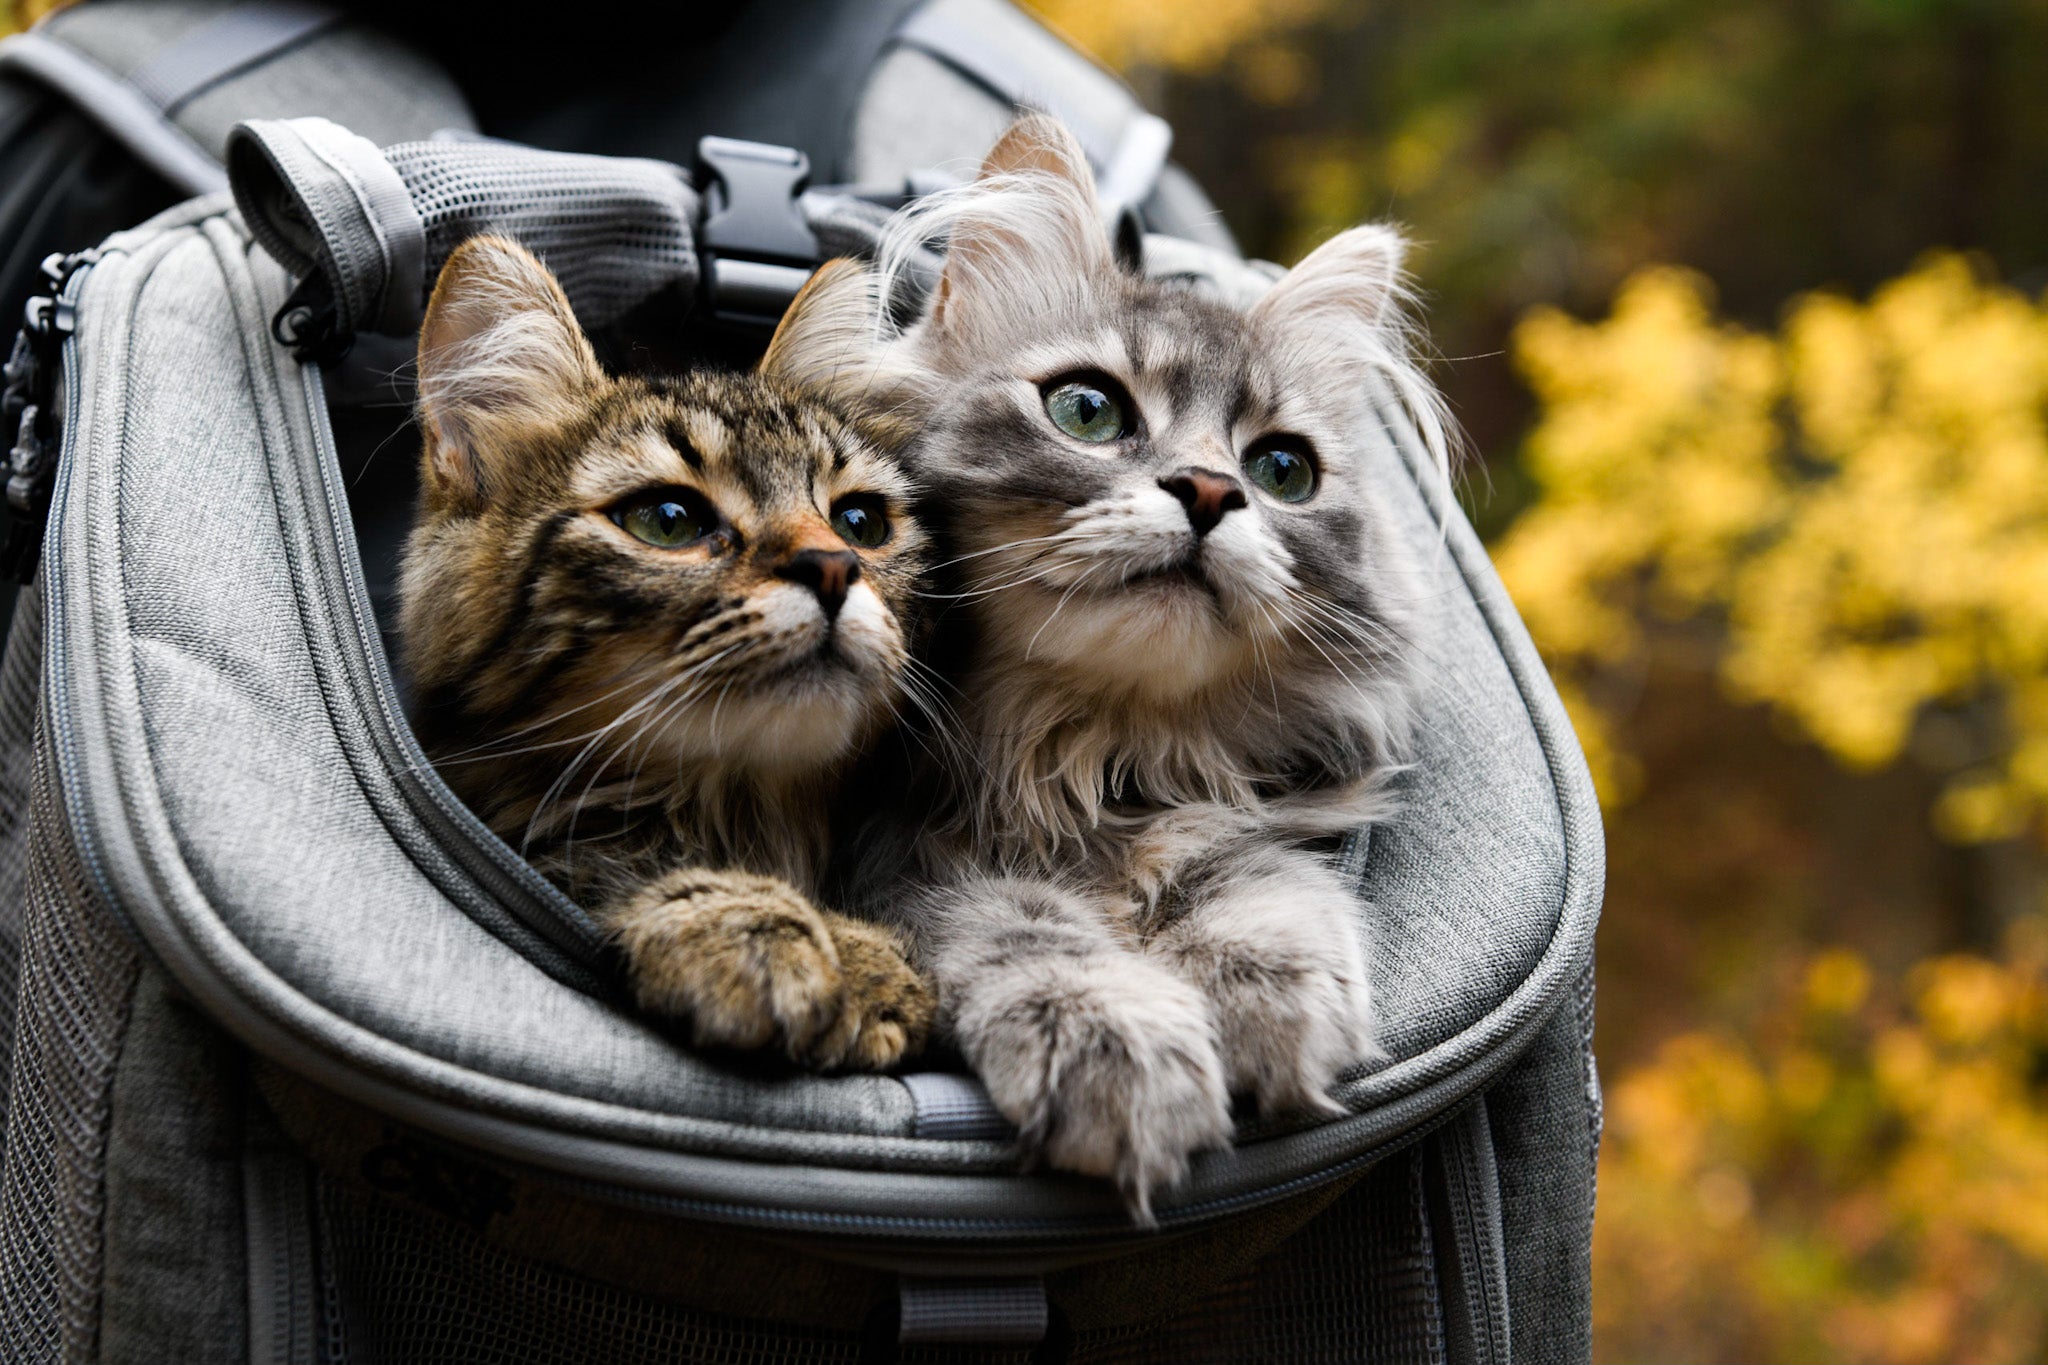 Travel Cat Tuesday: Rescued Kitty Sisters with an Unbreakable Bond